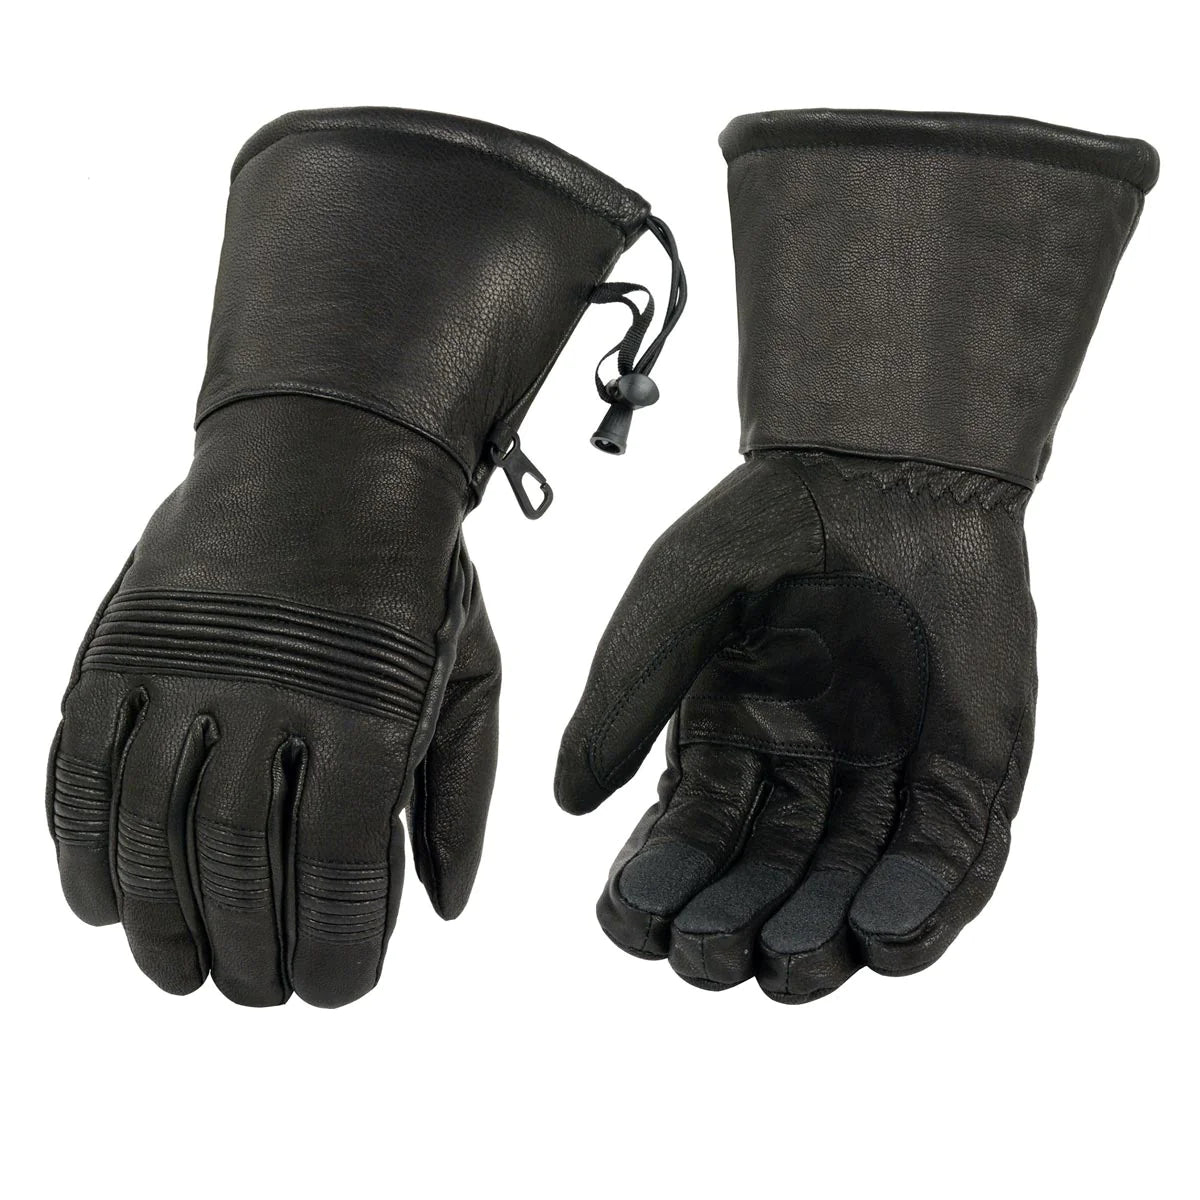 Men's Black Leather Waterproof Gauntlet Gloves with Stretch Knuckles